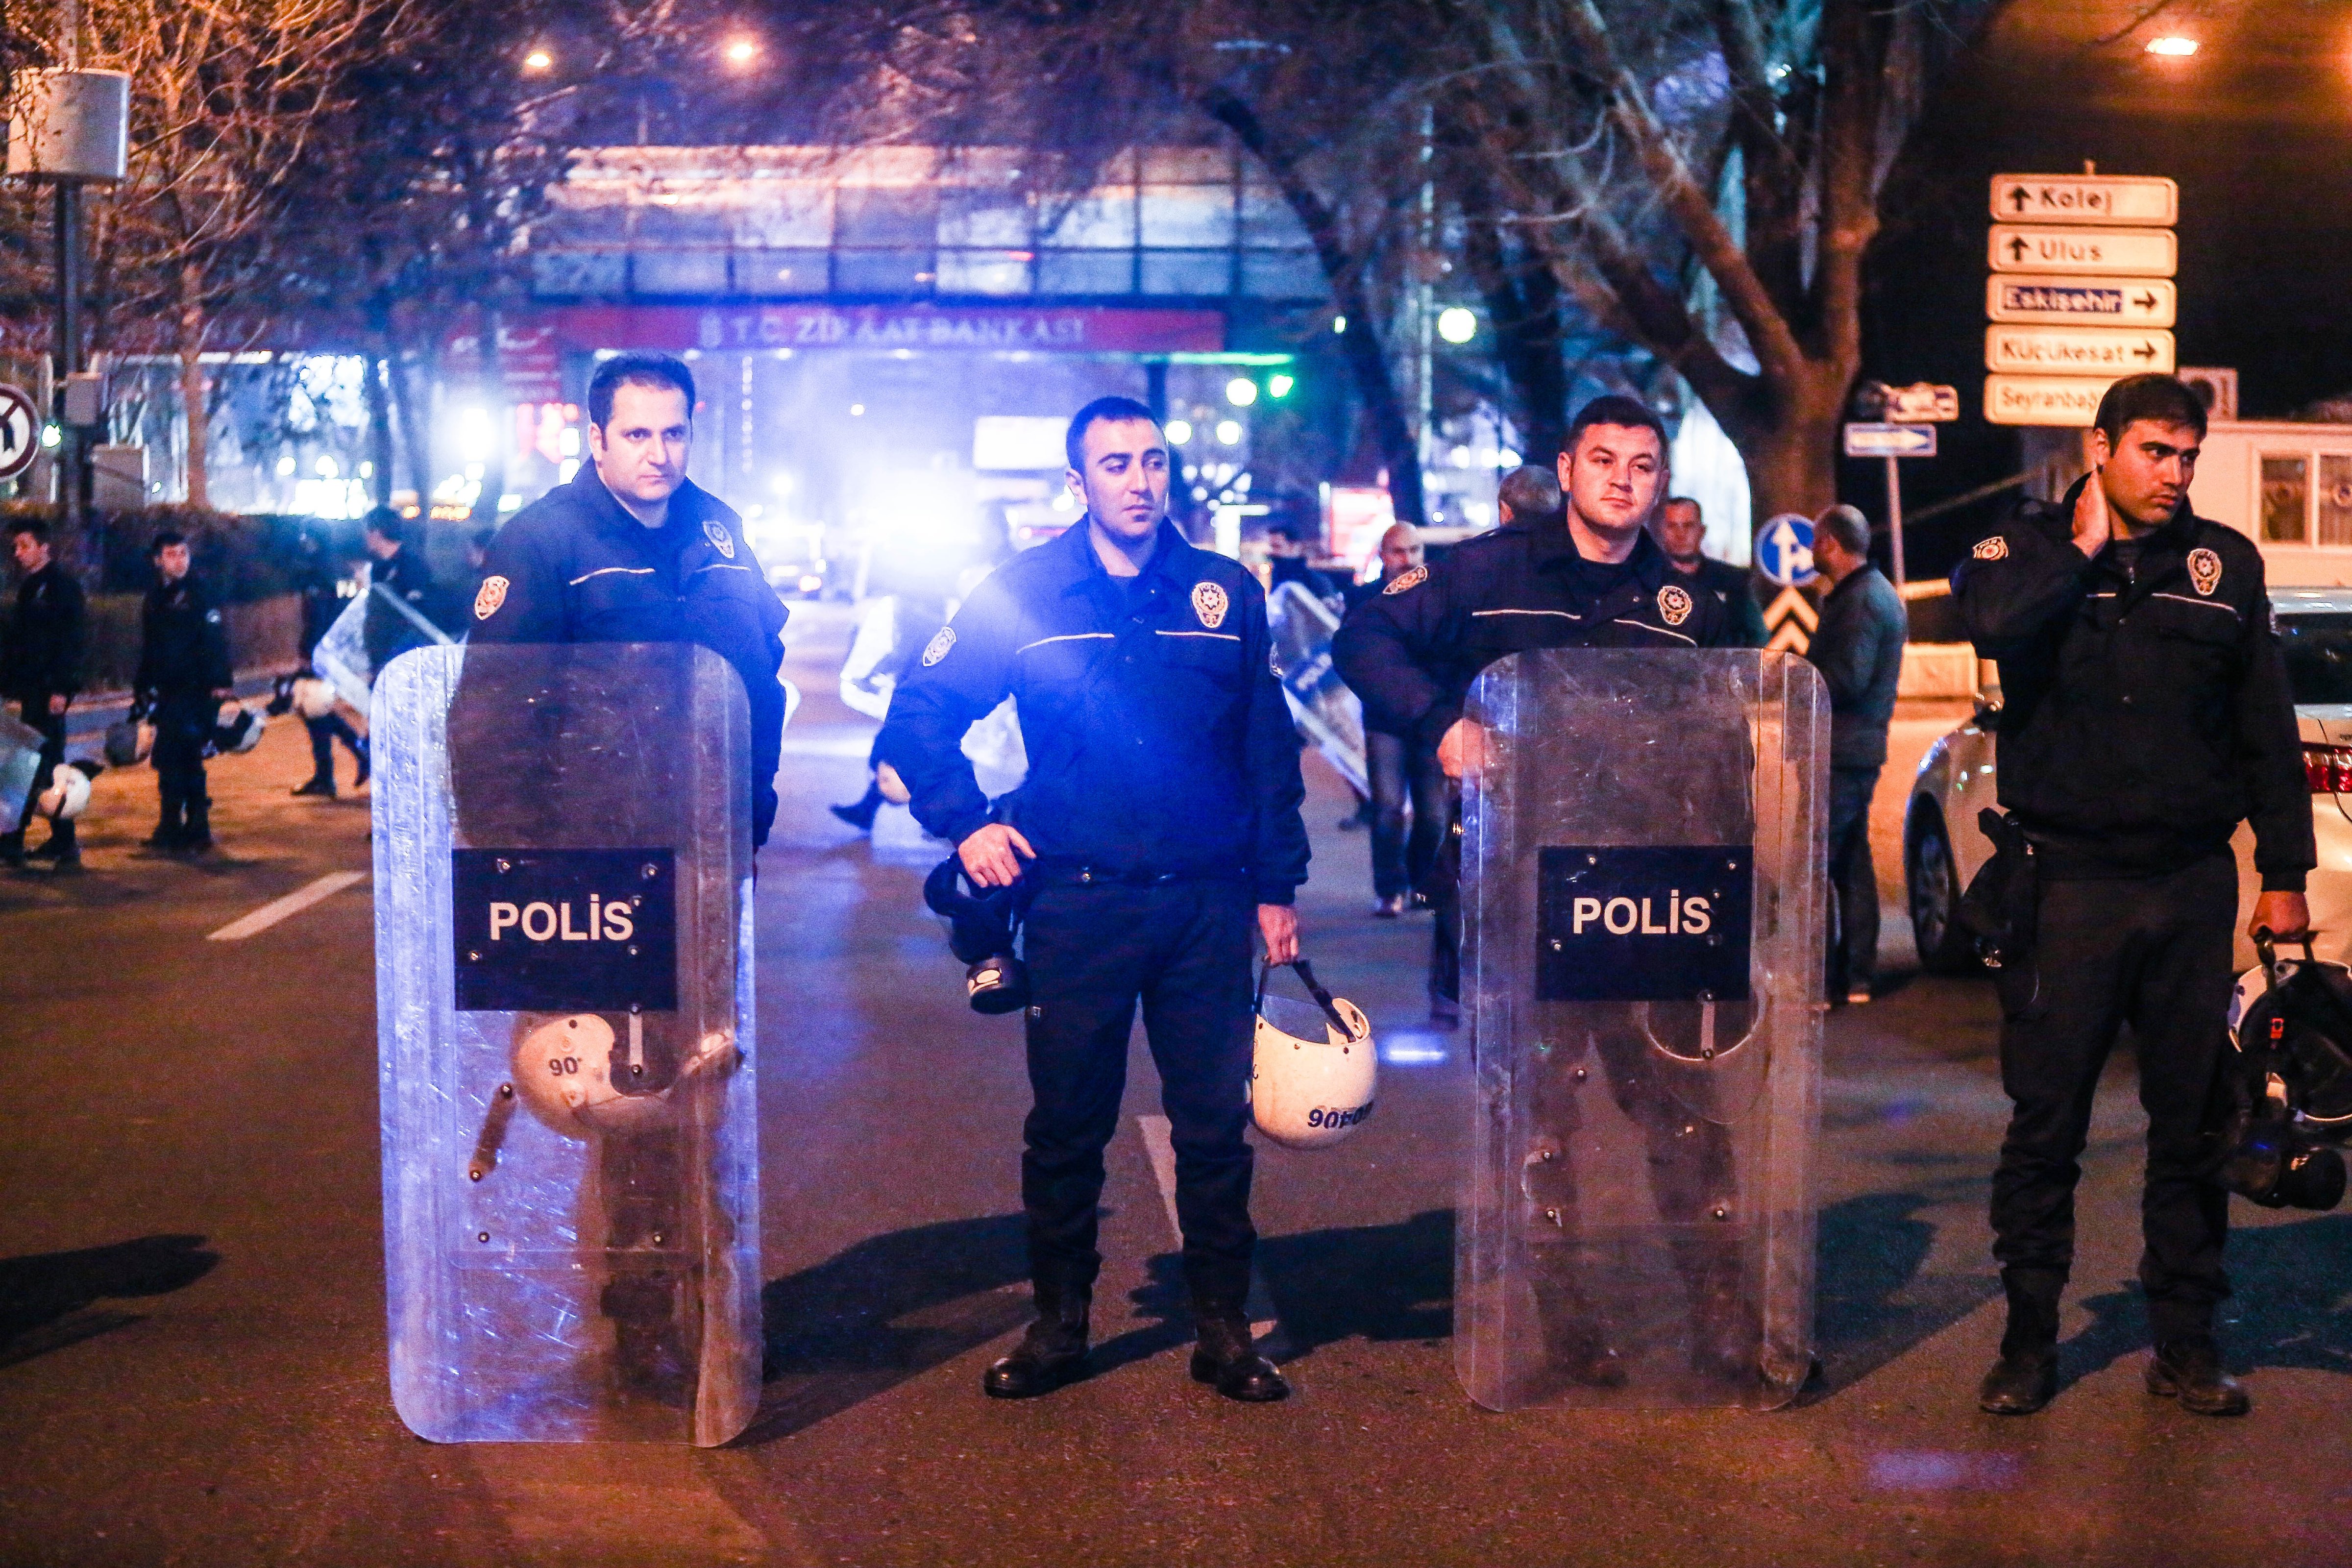 Turkish riot police secure the scene after an explosion in Ankara's central Kizilay district on March 13, 2016.